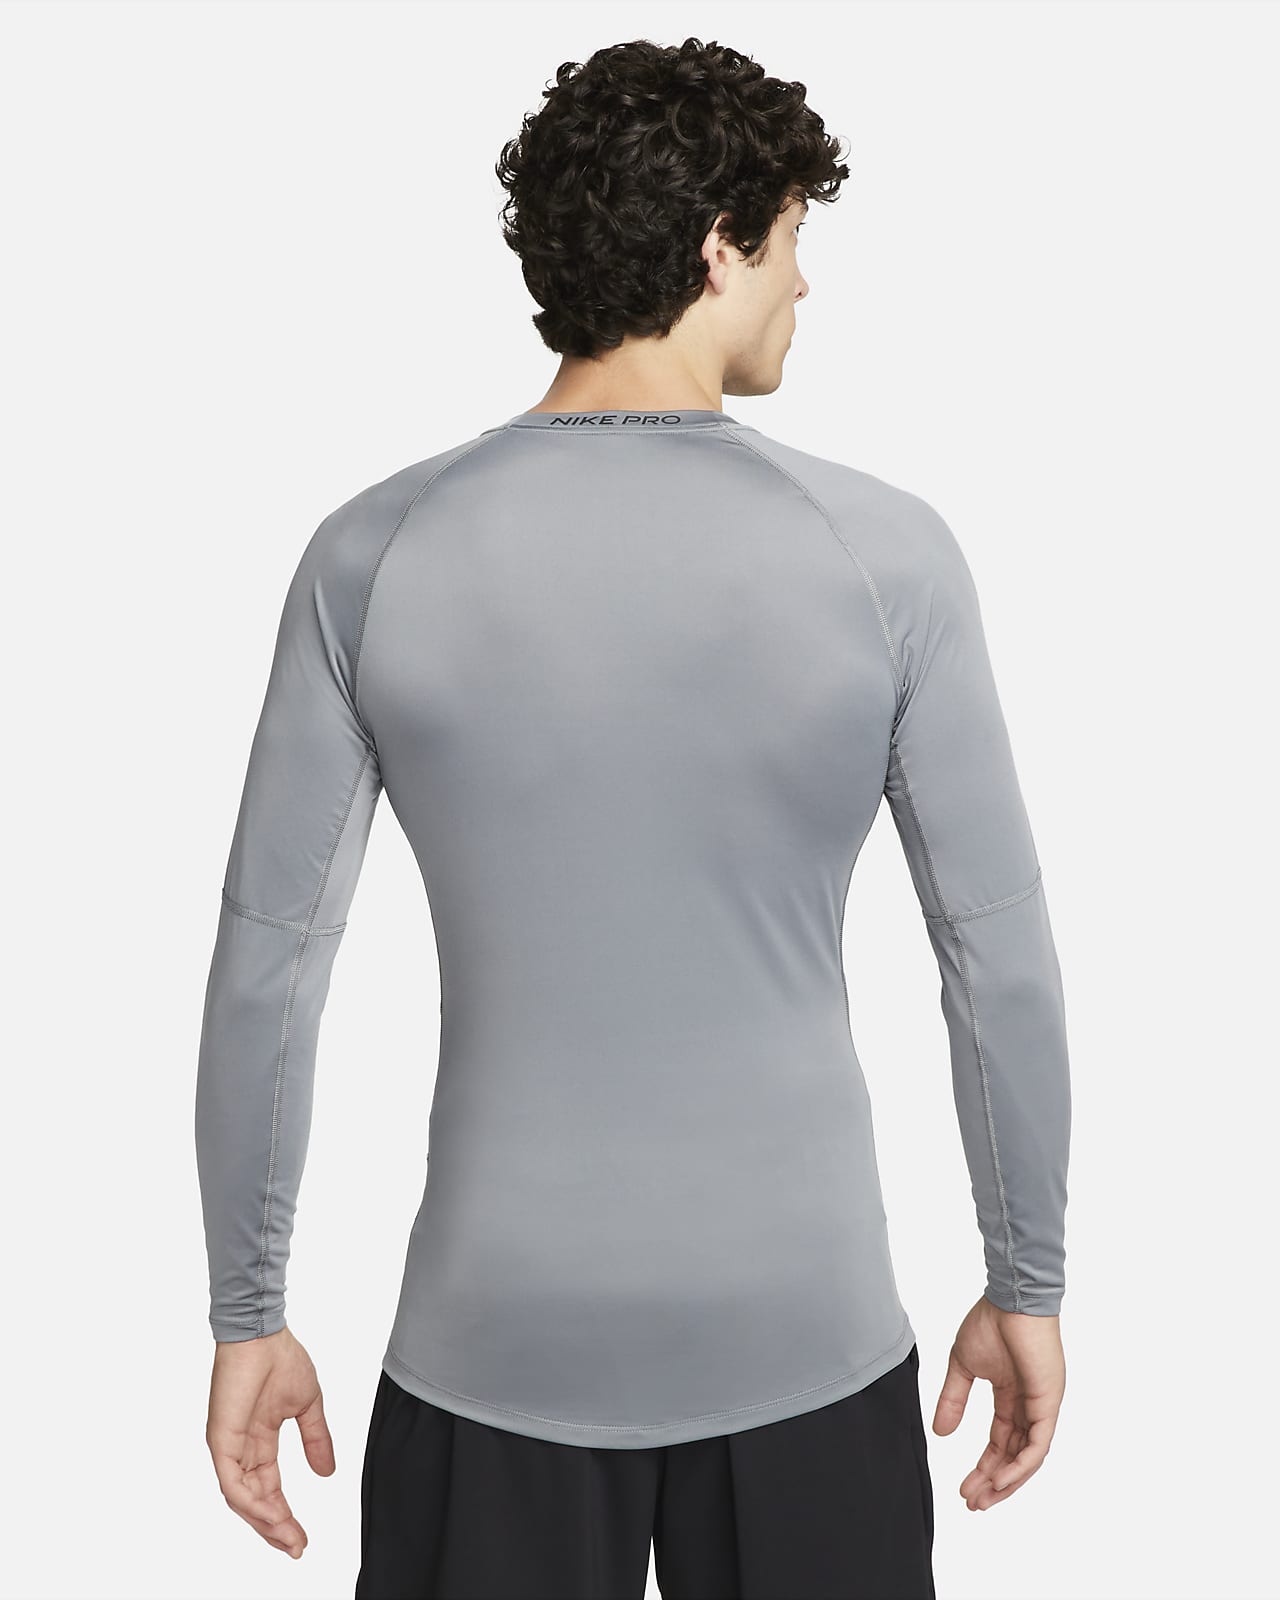 PRO GYM Men's Long Sleeve Compression Shirt, Dry Cool Fit, Base